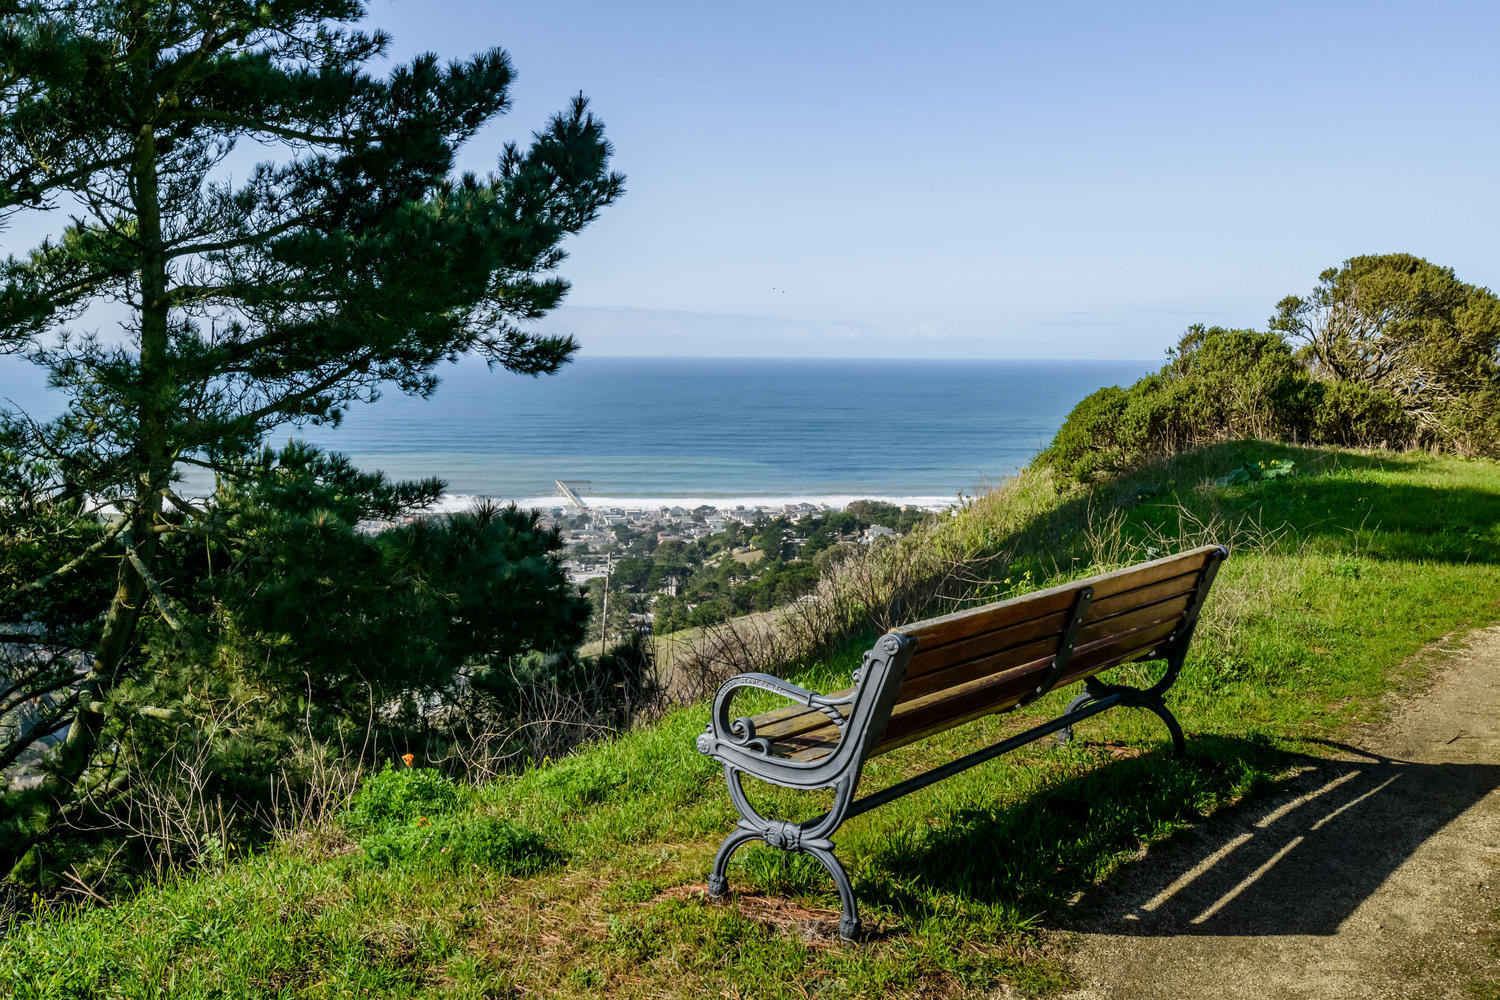 89 Outlook Circle Park Bench in East Sharp Park Neighborhood in Pacifica.